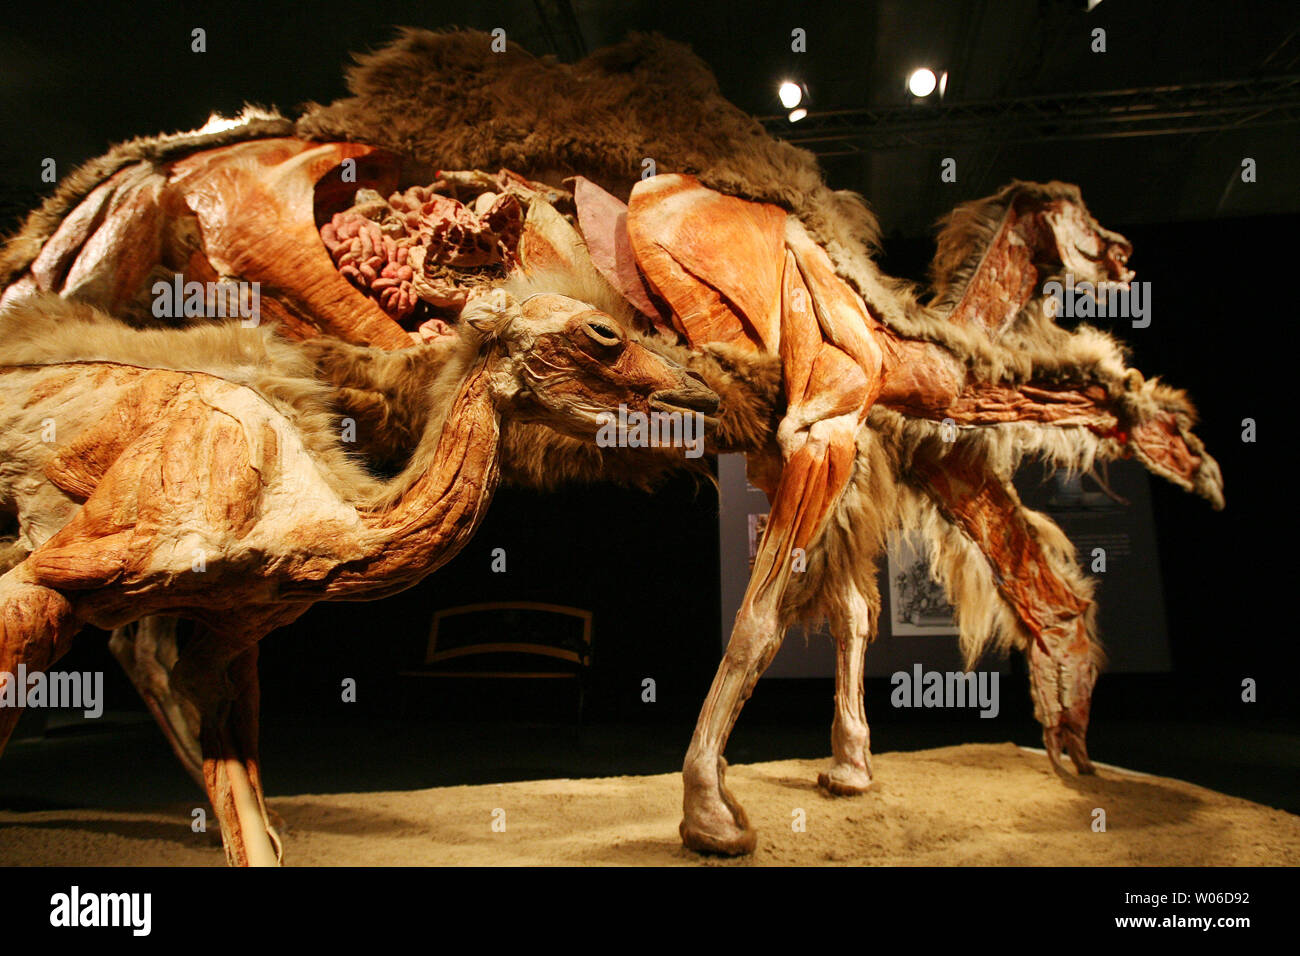 A baby camel is shown in the foreground next to an adult plastinate camel during an unveiling of the new pieces at the Body Worlds 3 exhibit at the Saint Louis Science Center,in St. Louis on December 13, 2007. (UPI Photo/Bill Greenblatt) Stock Photo